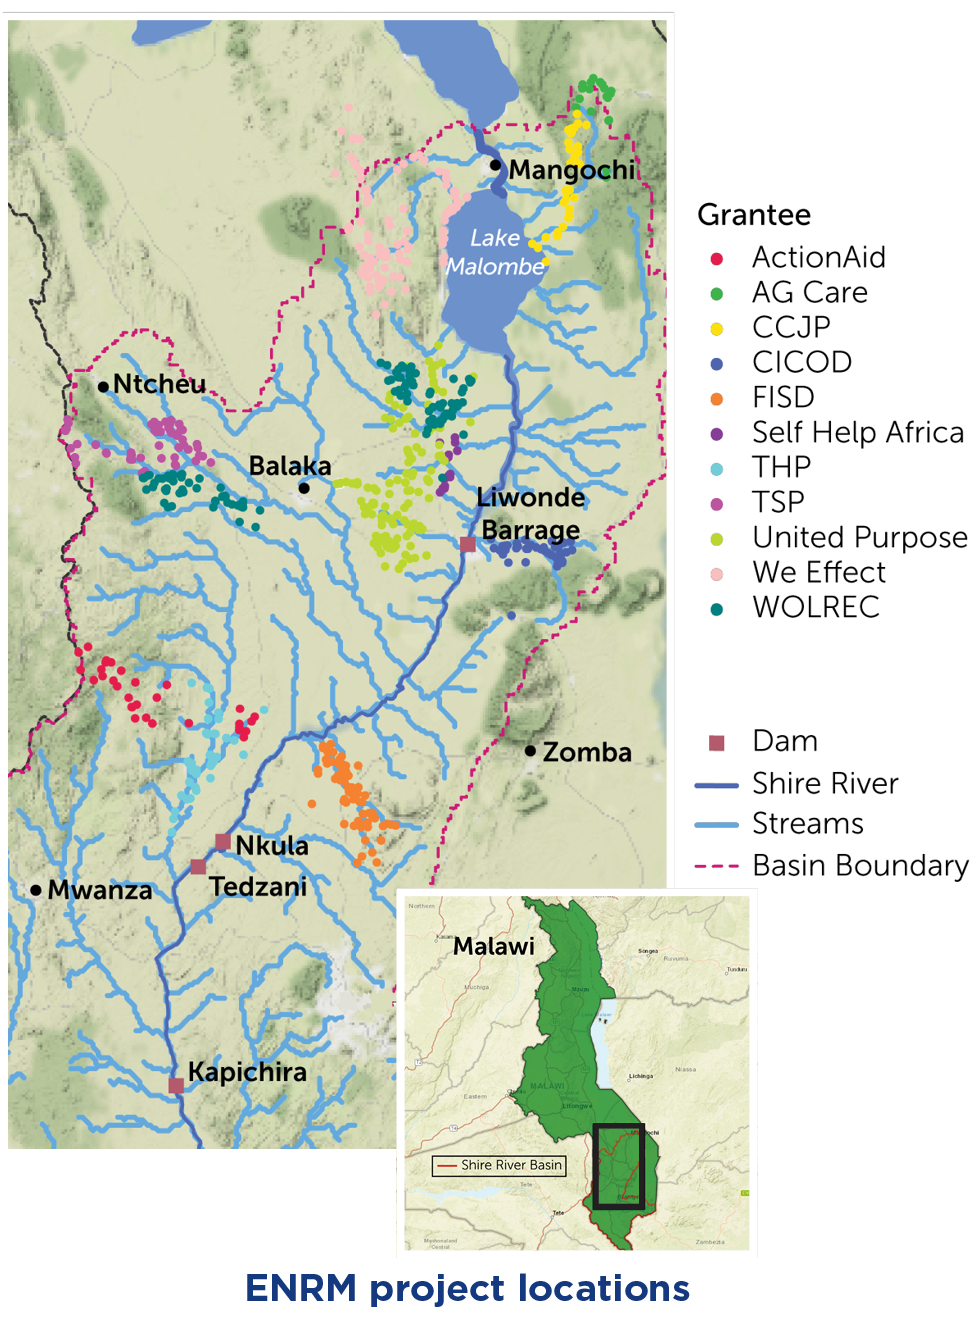 Shire River Basin and location of hydropower plants and ENRM and SGEF grantee activities.